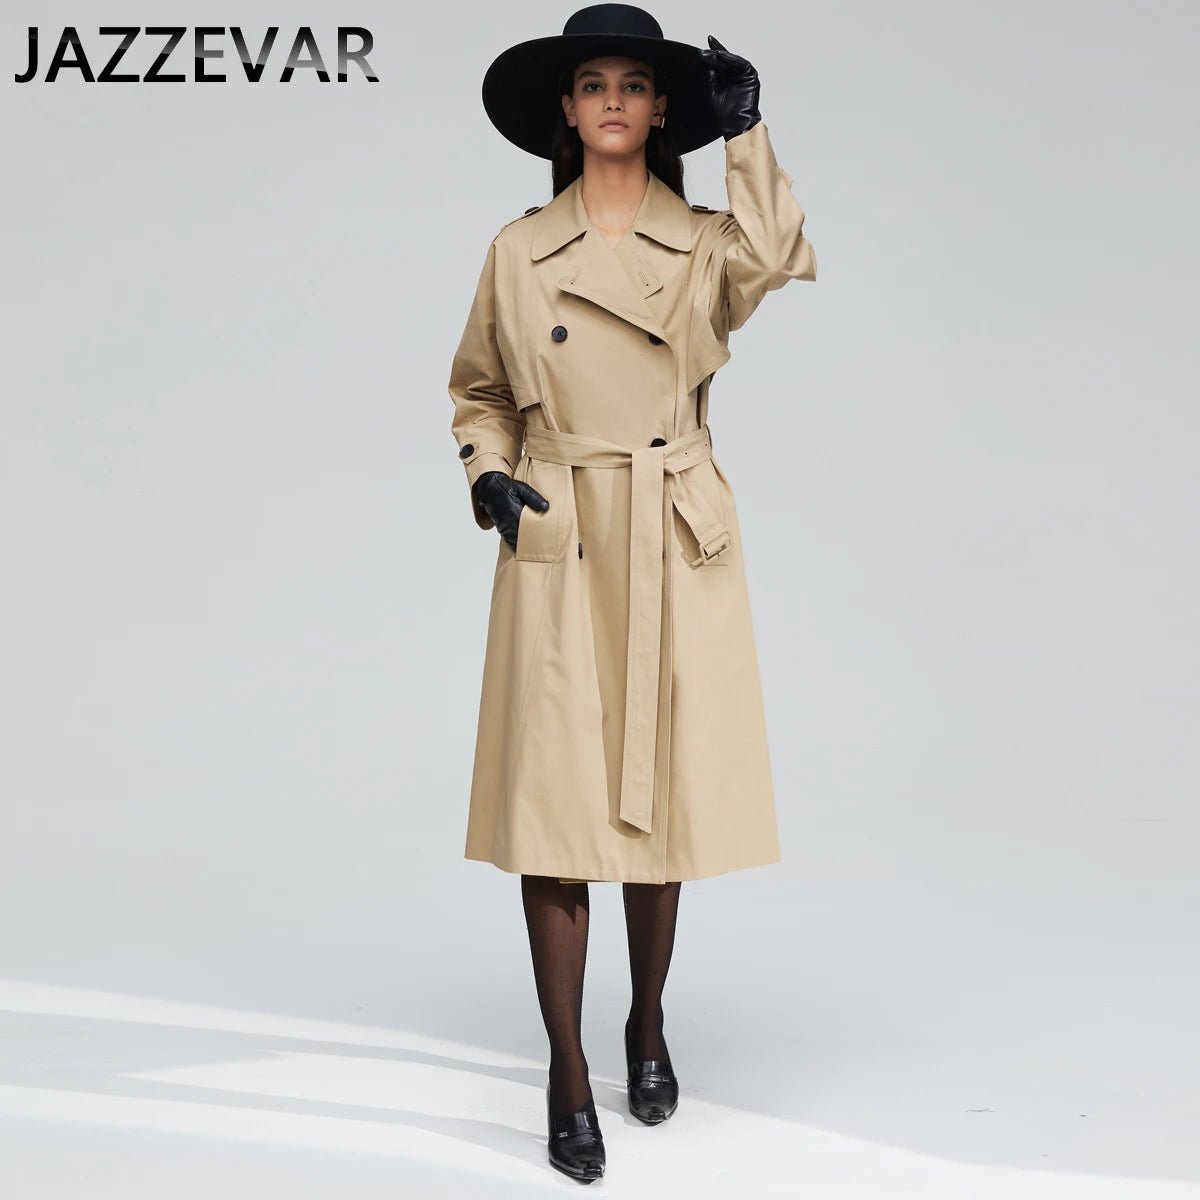 New autumn and winter double-breasted casual long trench coat women for trench coat coat with belt - Guy Christopher